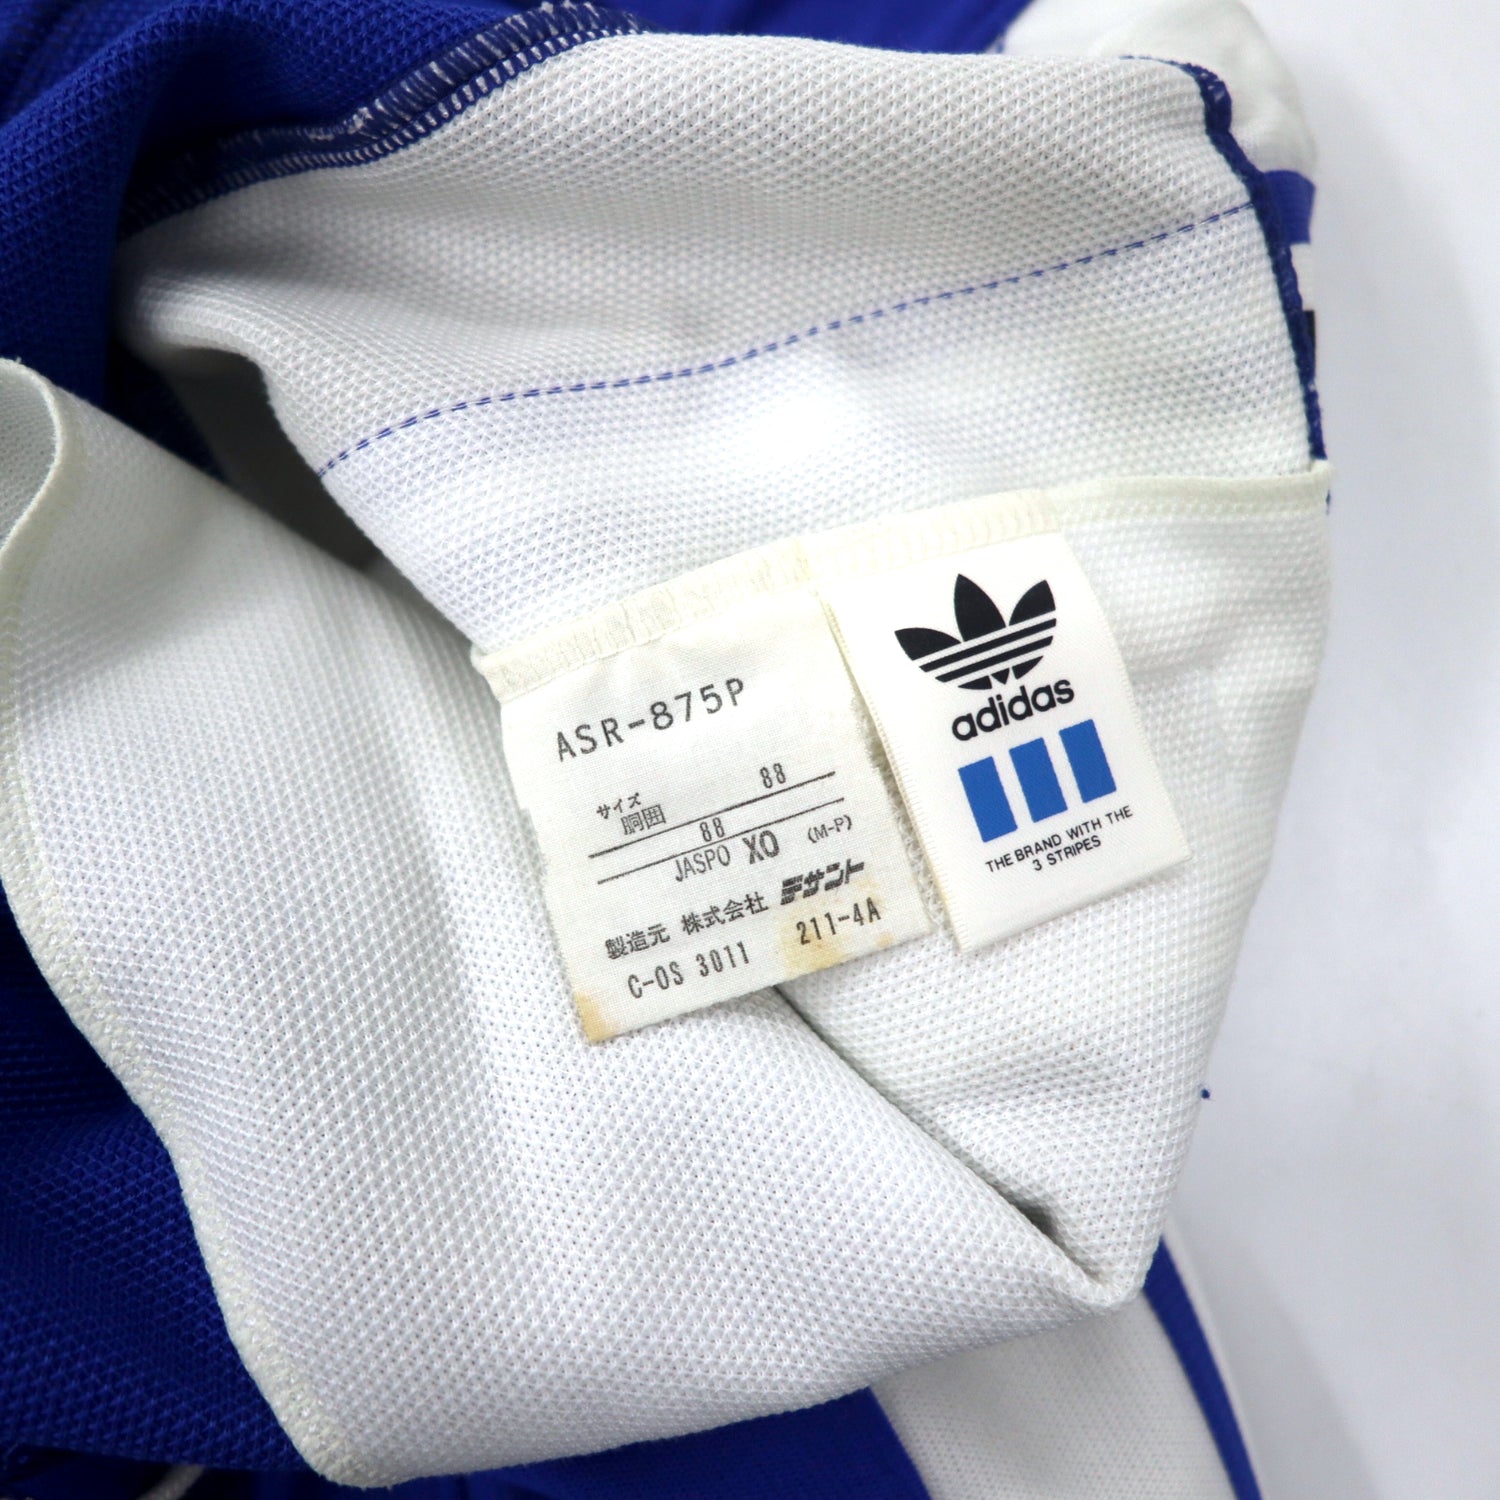 Adidas 80's Descente MADE TRACK PANTS Jersey XO Blue Polyester 3 